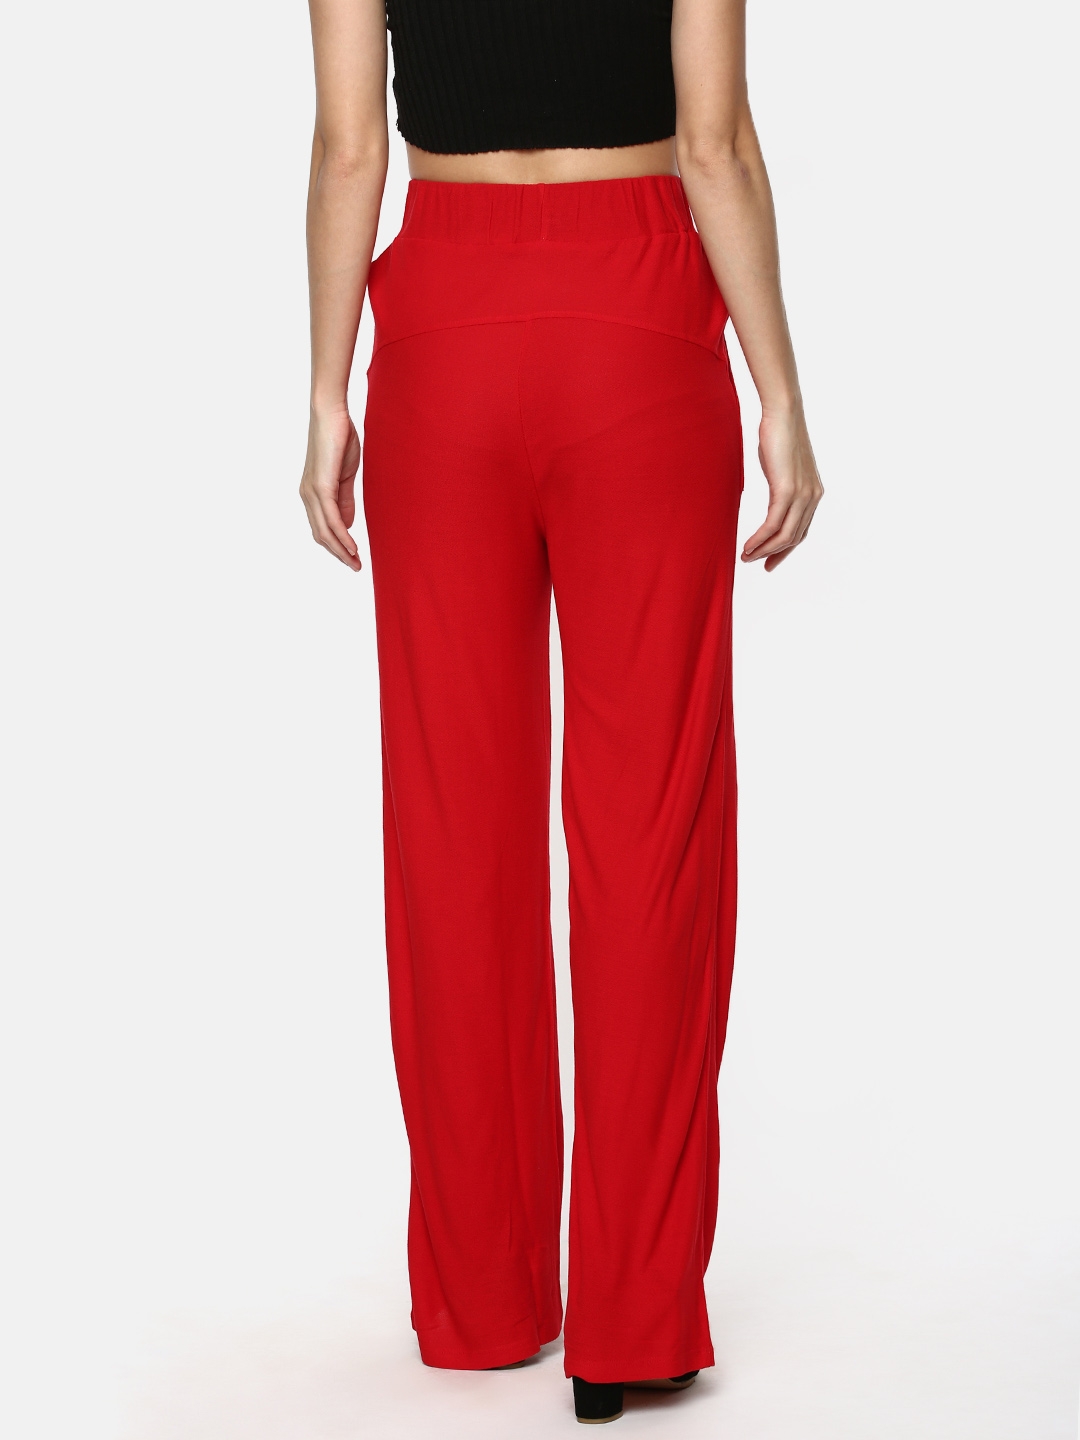 Y CAN F | YCANF Women's Casual Red Palazzos 2